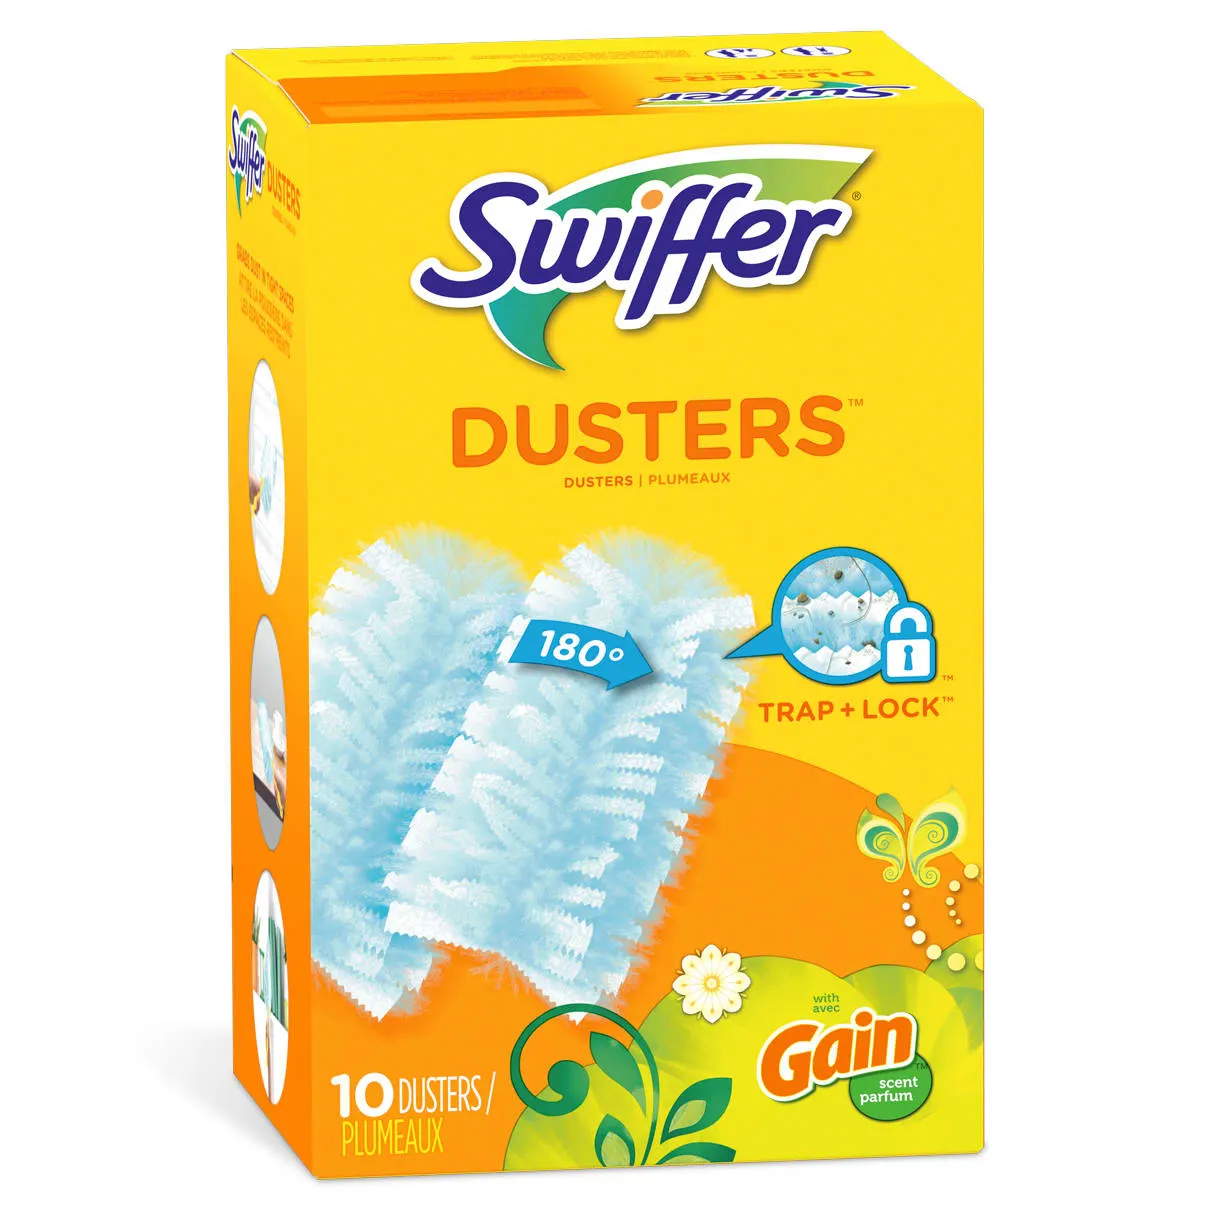 SWIFFER Lingettes Humides 970076 Recharges 24 lingettes - Ecomedia AG